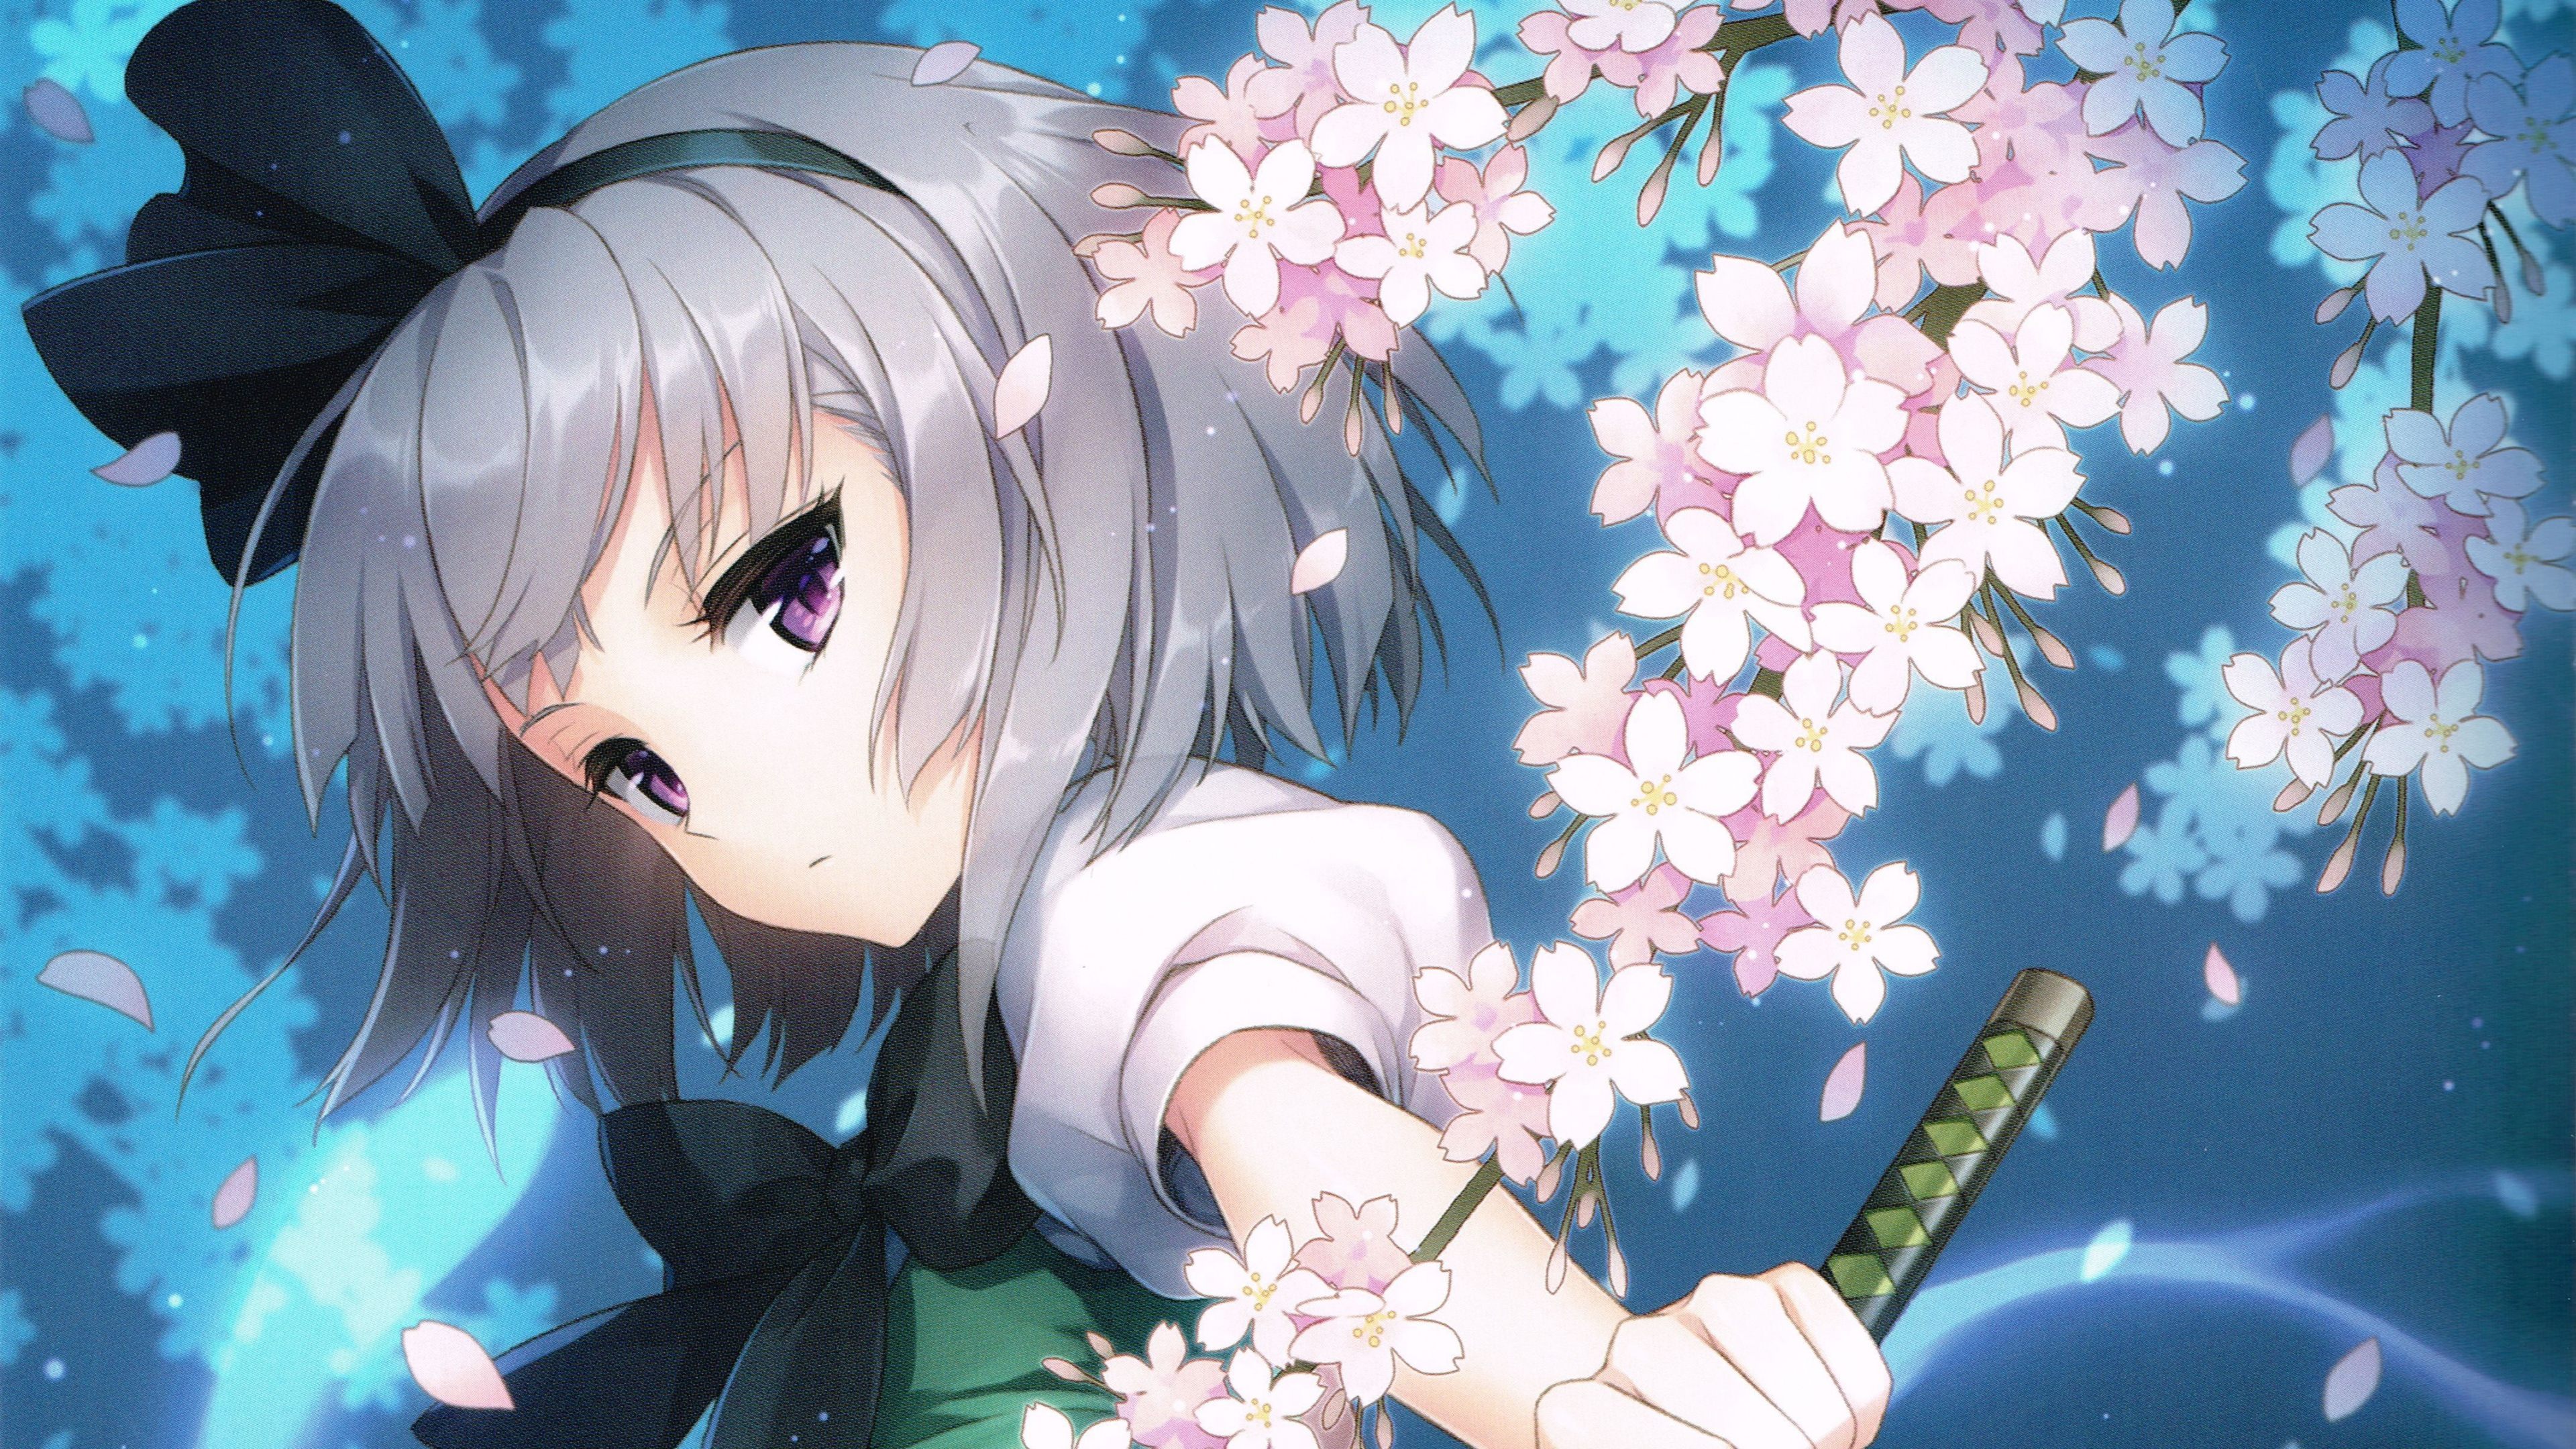 Nightcore Anime Wallpapers - Wallpaper Cave